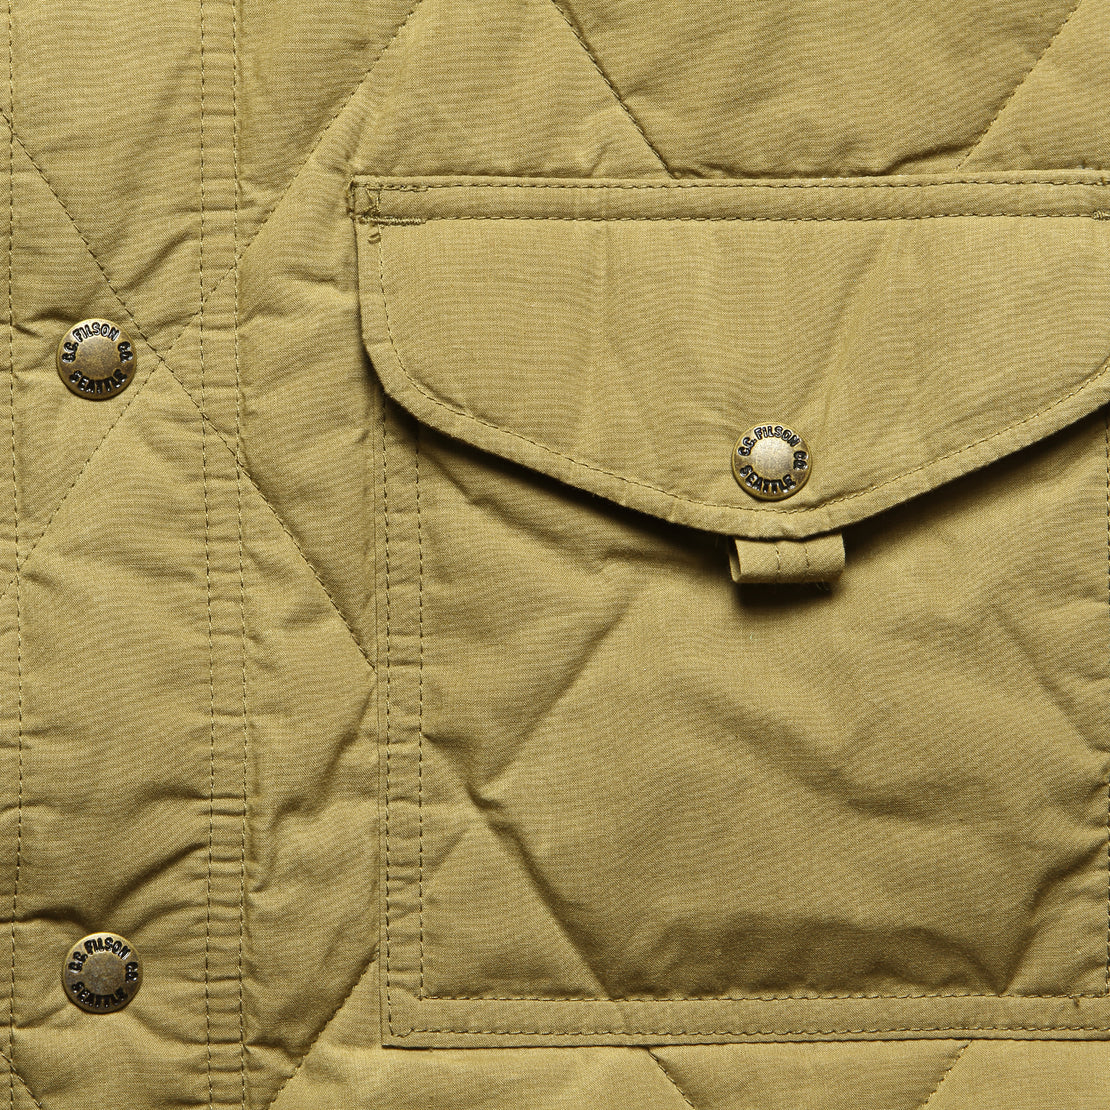 Hyder Quilted Jac Shirt - Tan